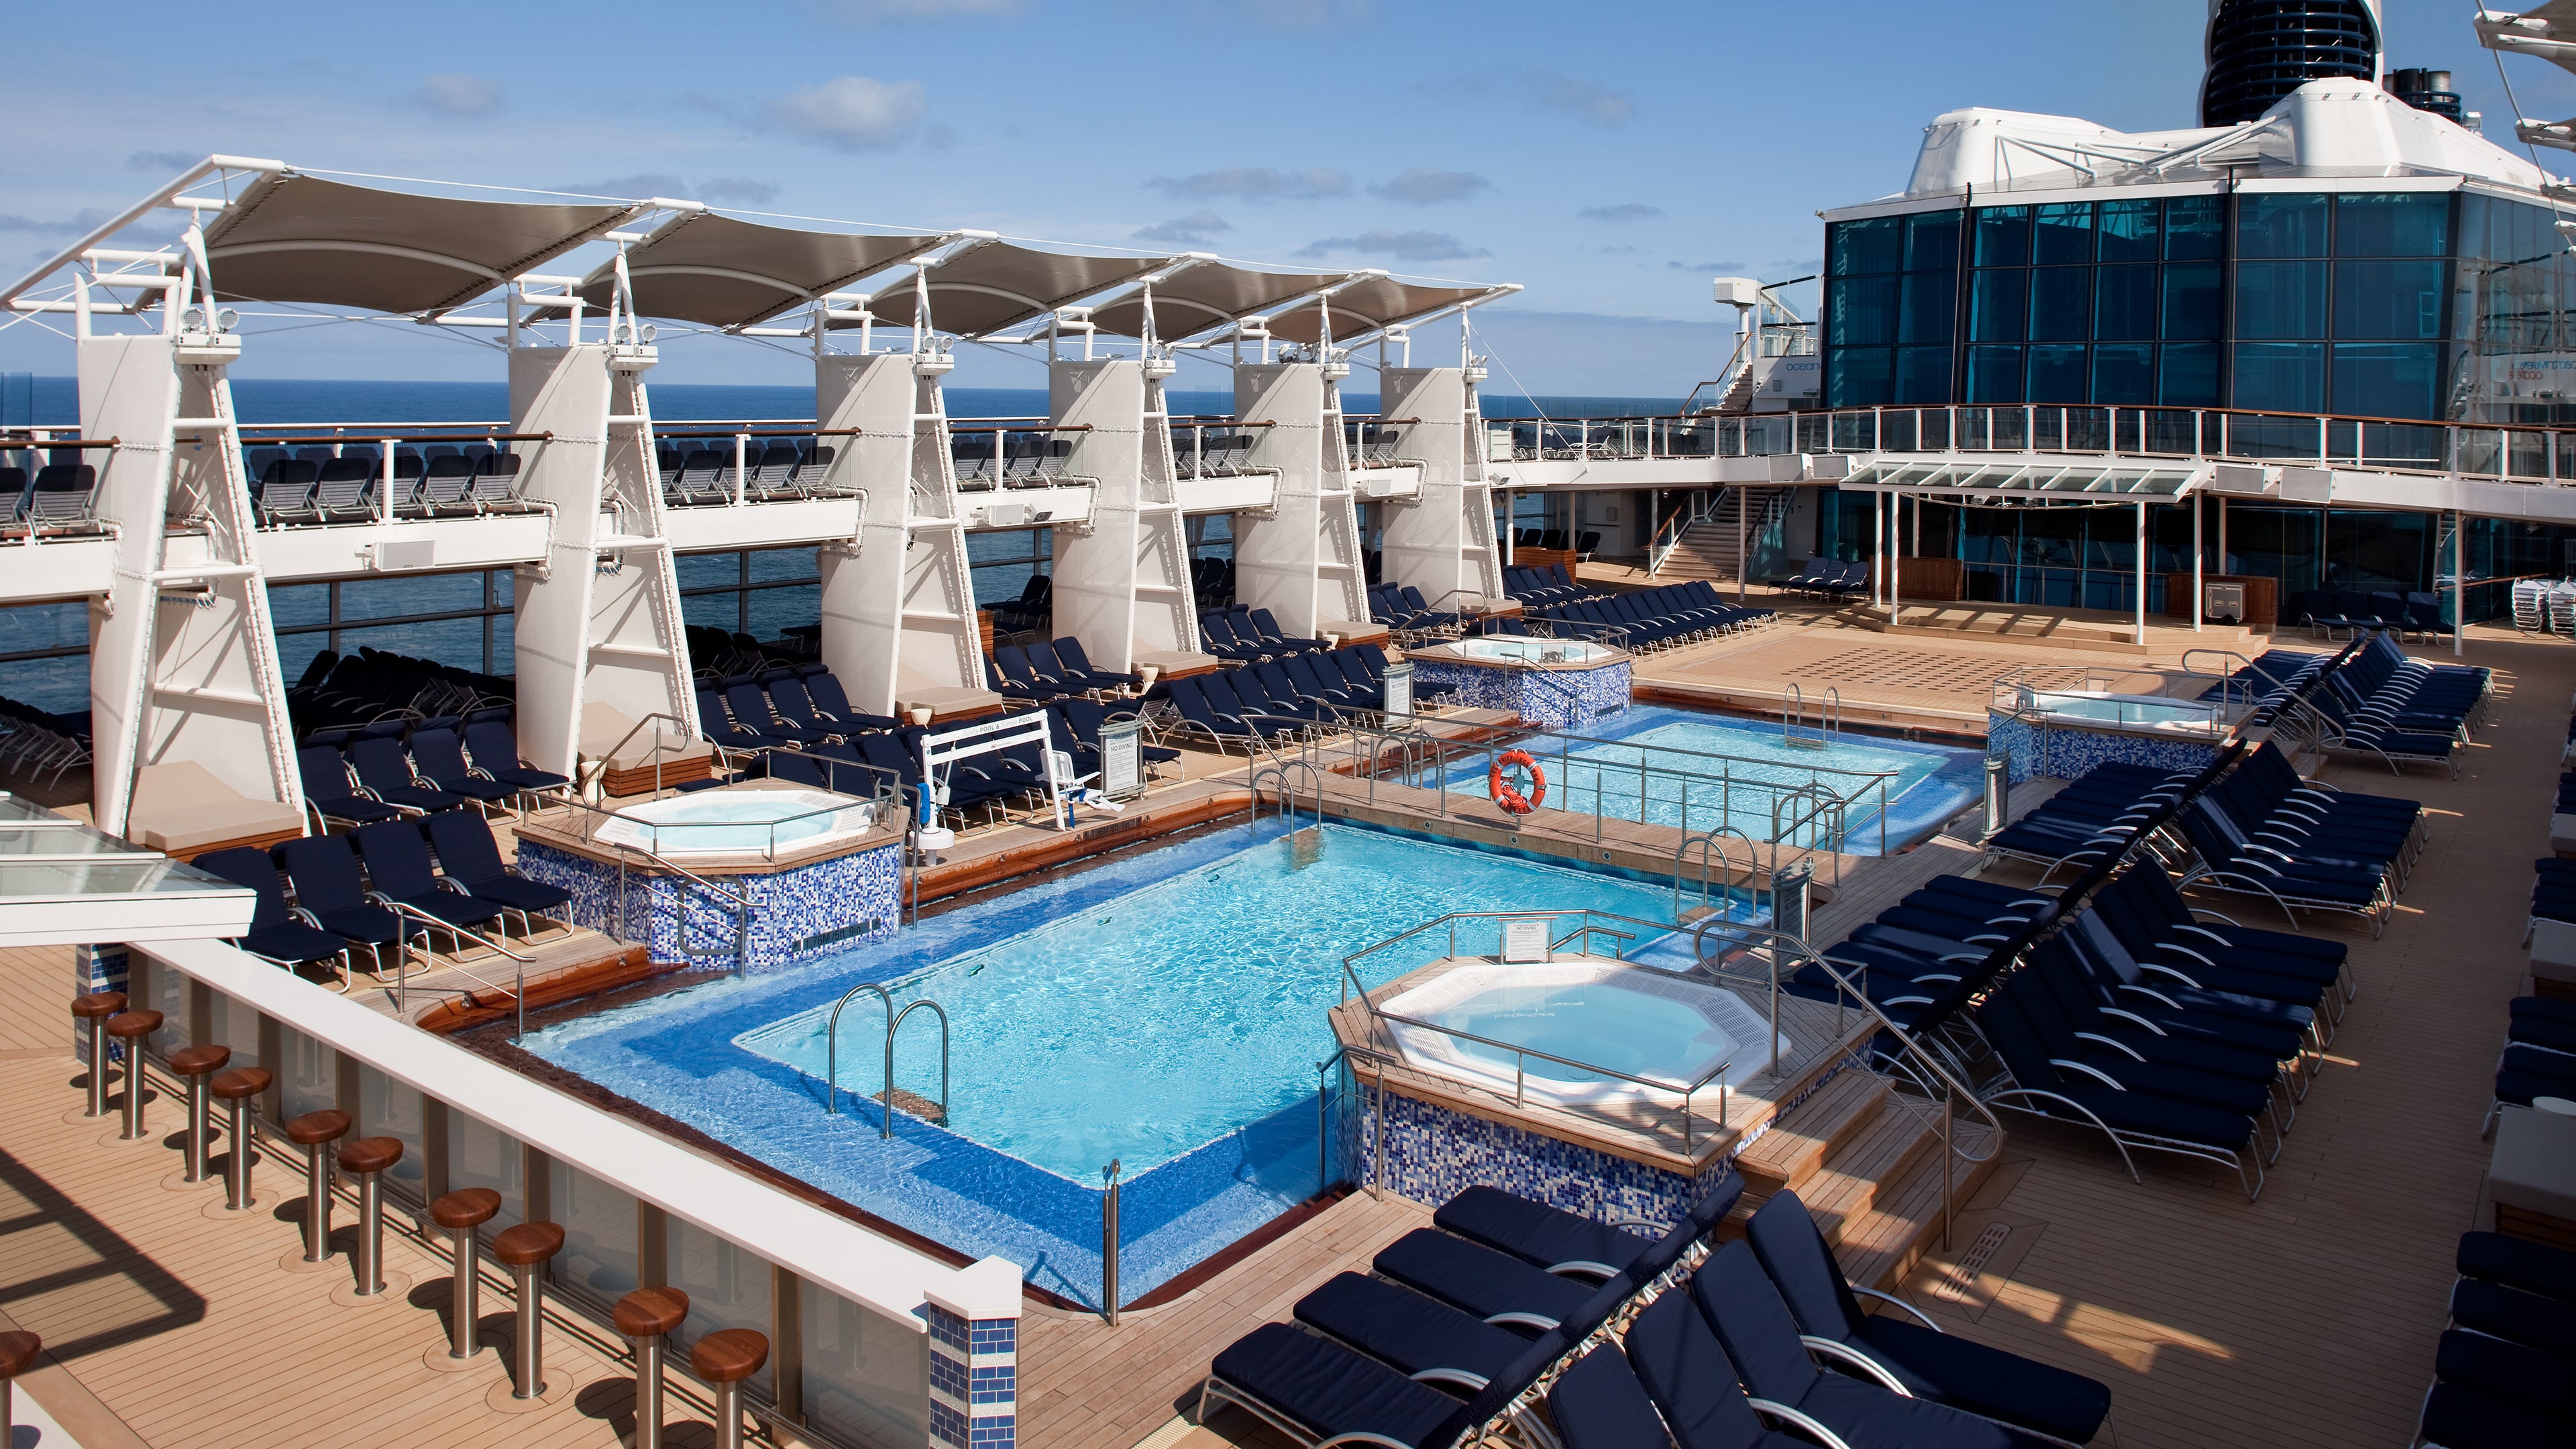 Celebrity Eclipse Wallpapers